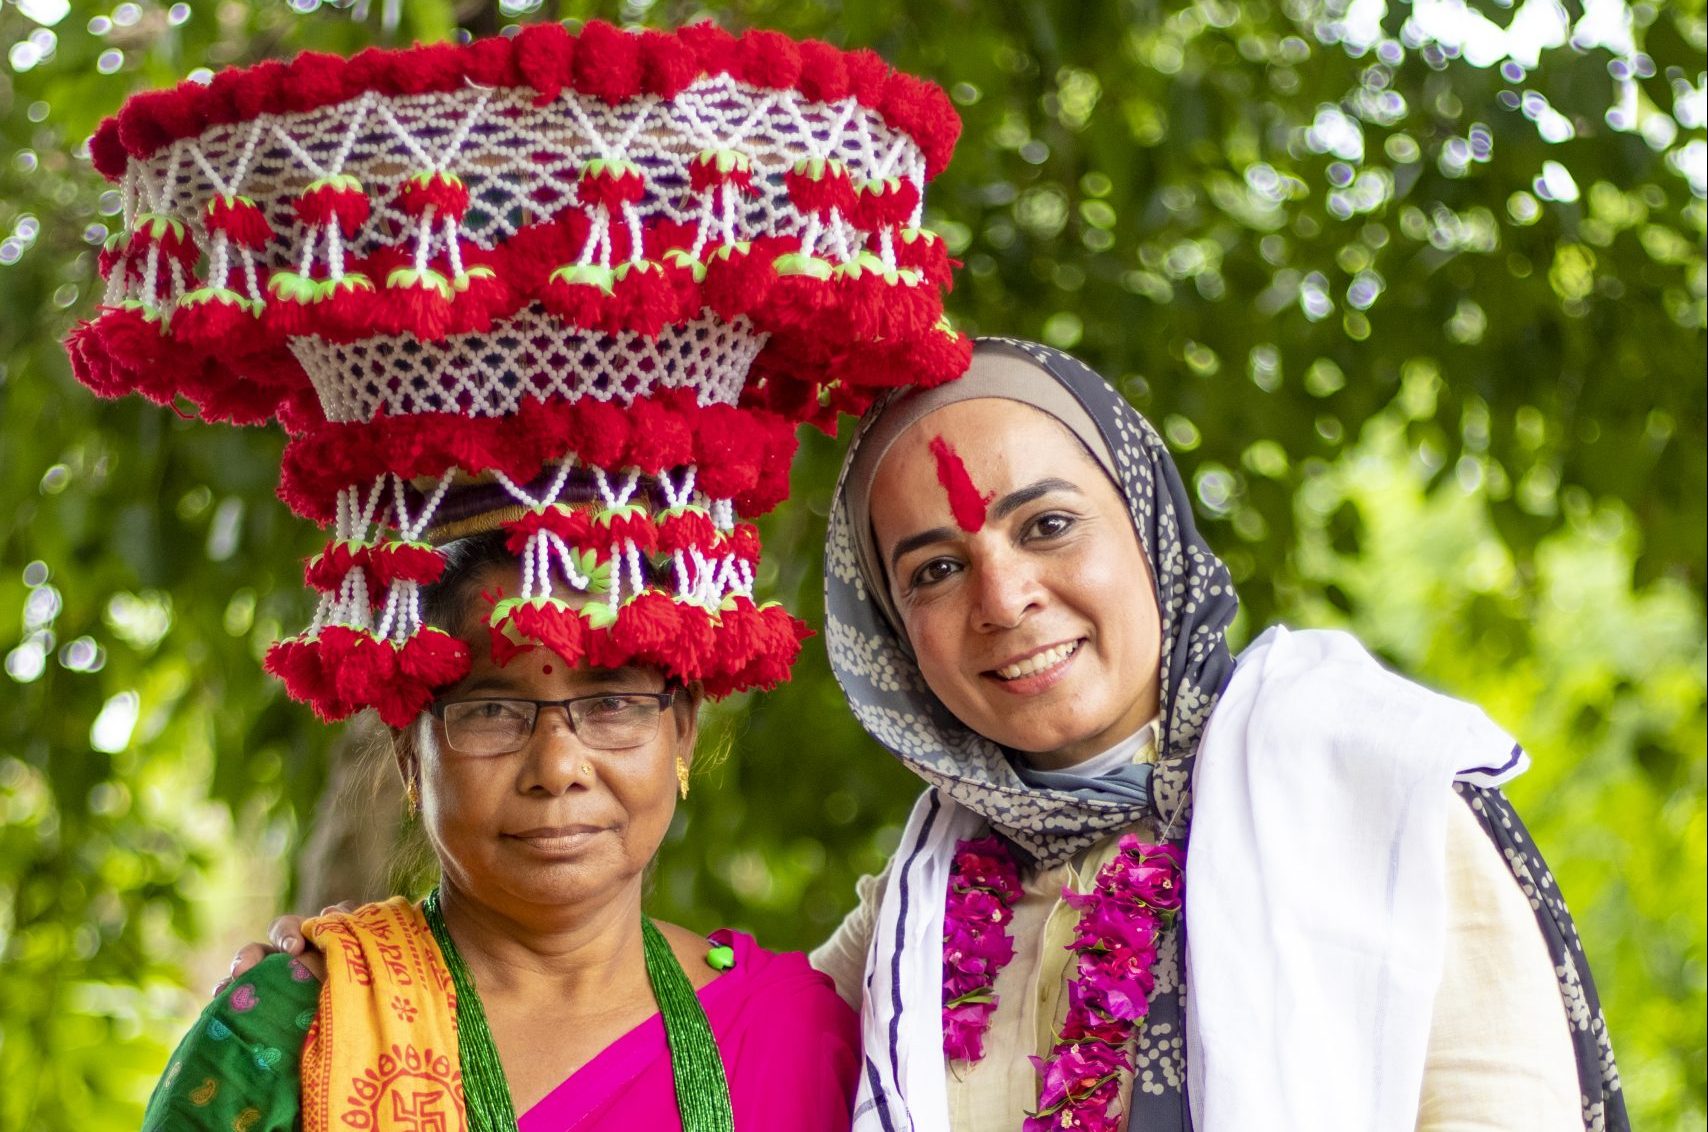 Two standing, smiling women - one is Nepali and wears a very large tassled hat, the other a headscarf and a red stripe down the middle of her forehead